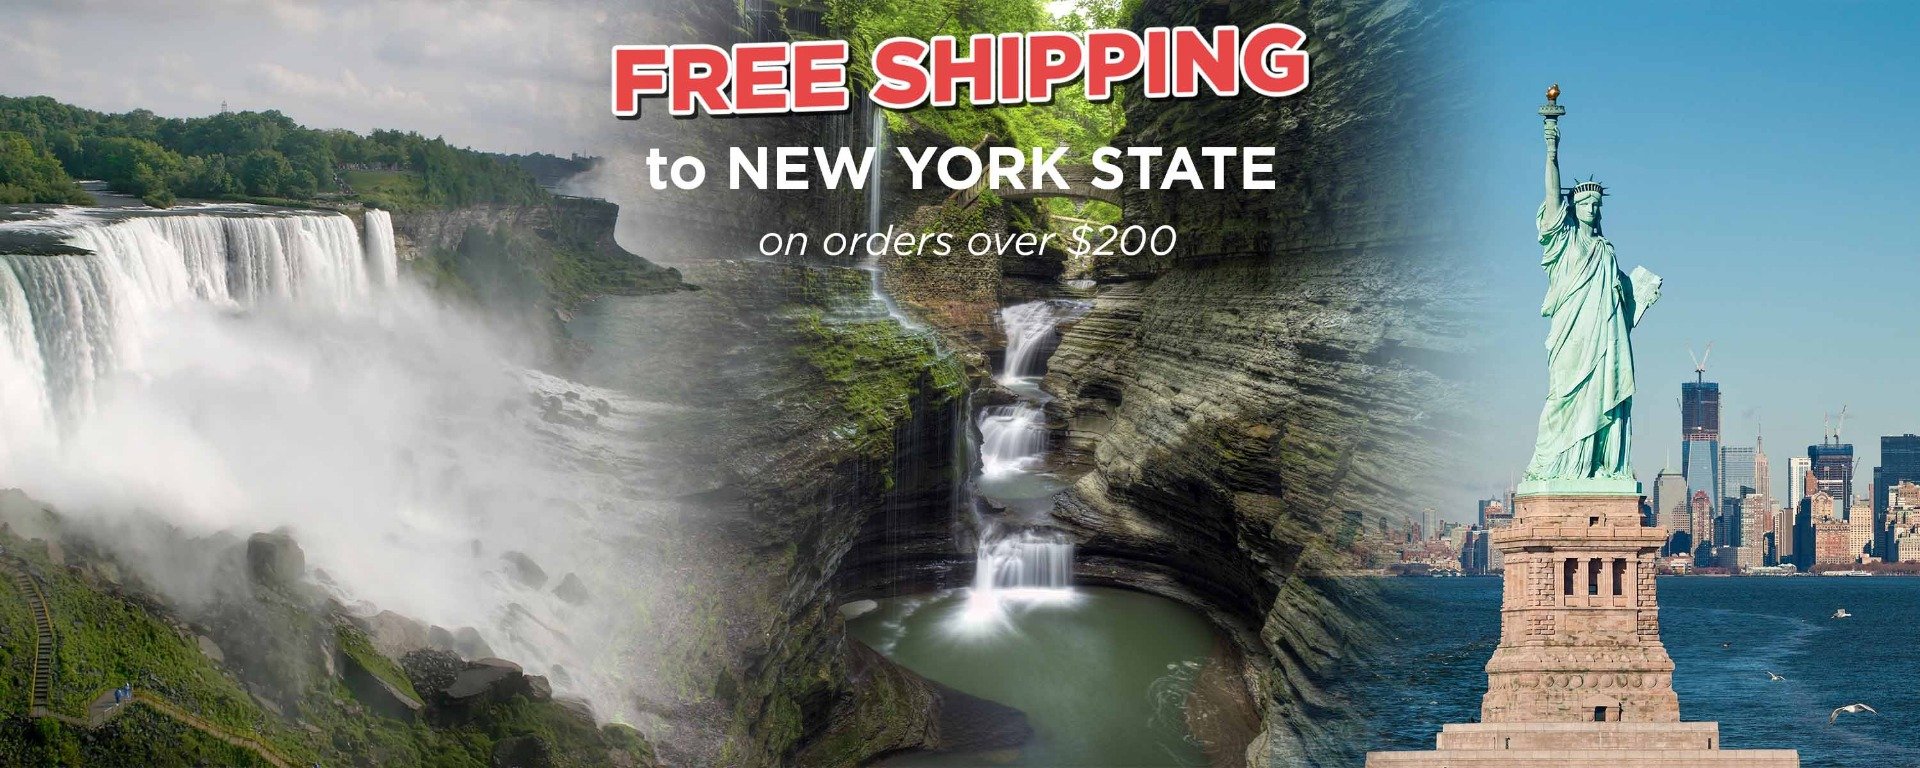 Free Shipping to New York State on Orders Over $200